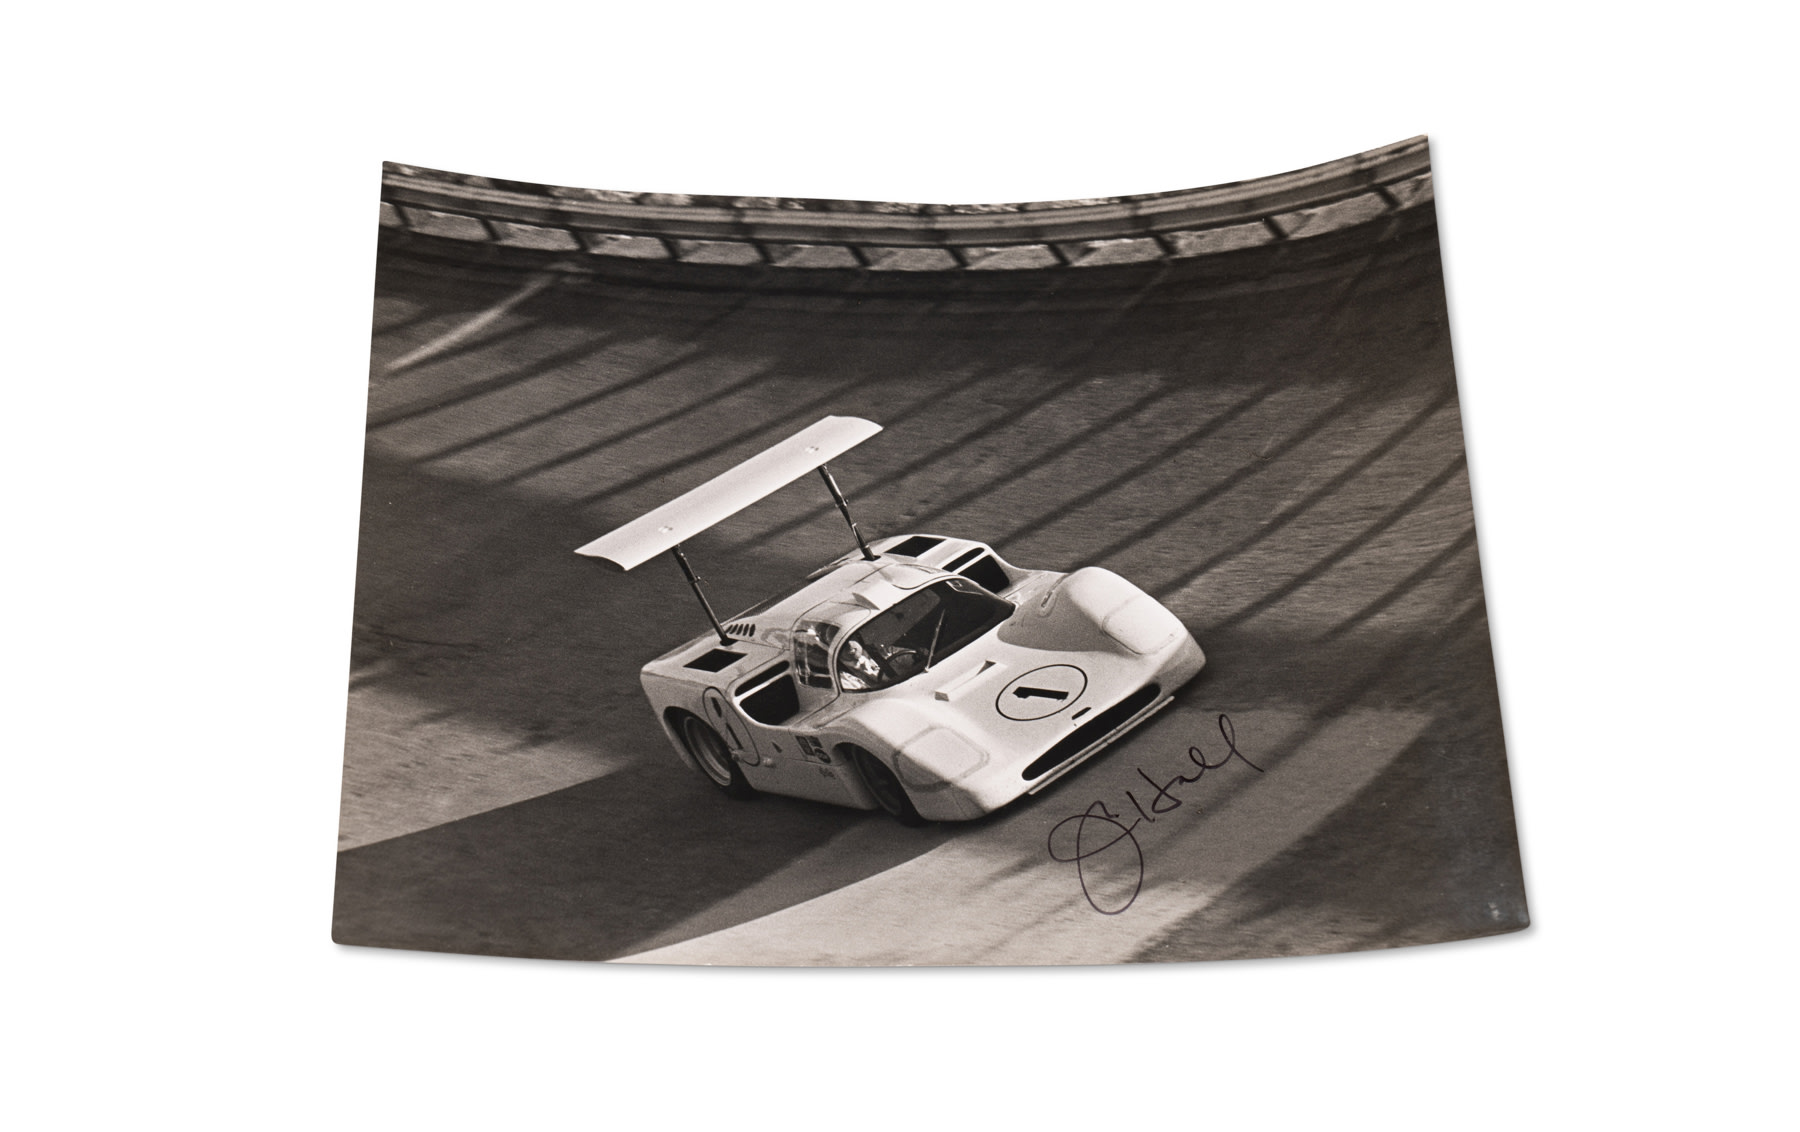 Photograph of the Chaparral 2F at Monza, Signed by Jim Hall